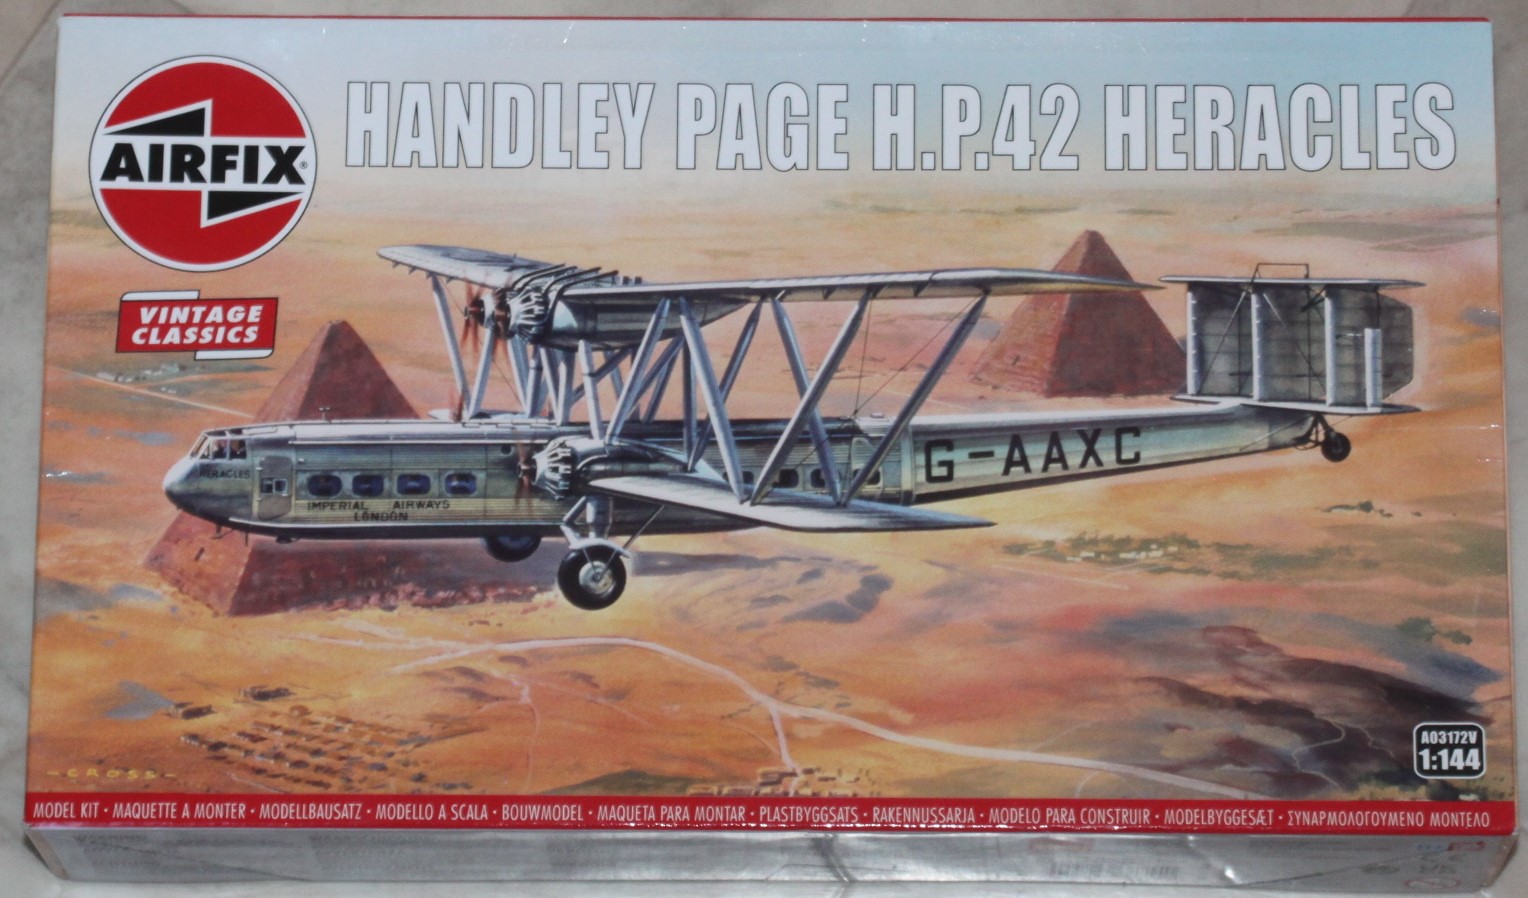 Handley Page H.P.42 "Heracles", Airfix 1.144 51890804376_10c1e9ec22_h